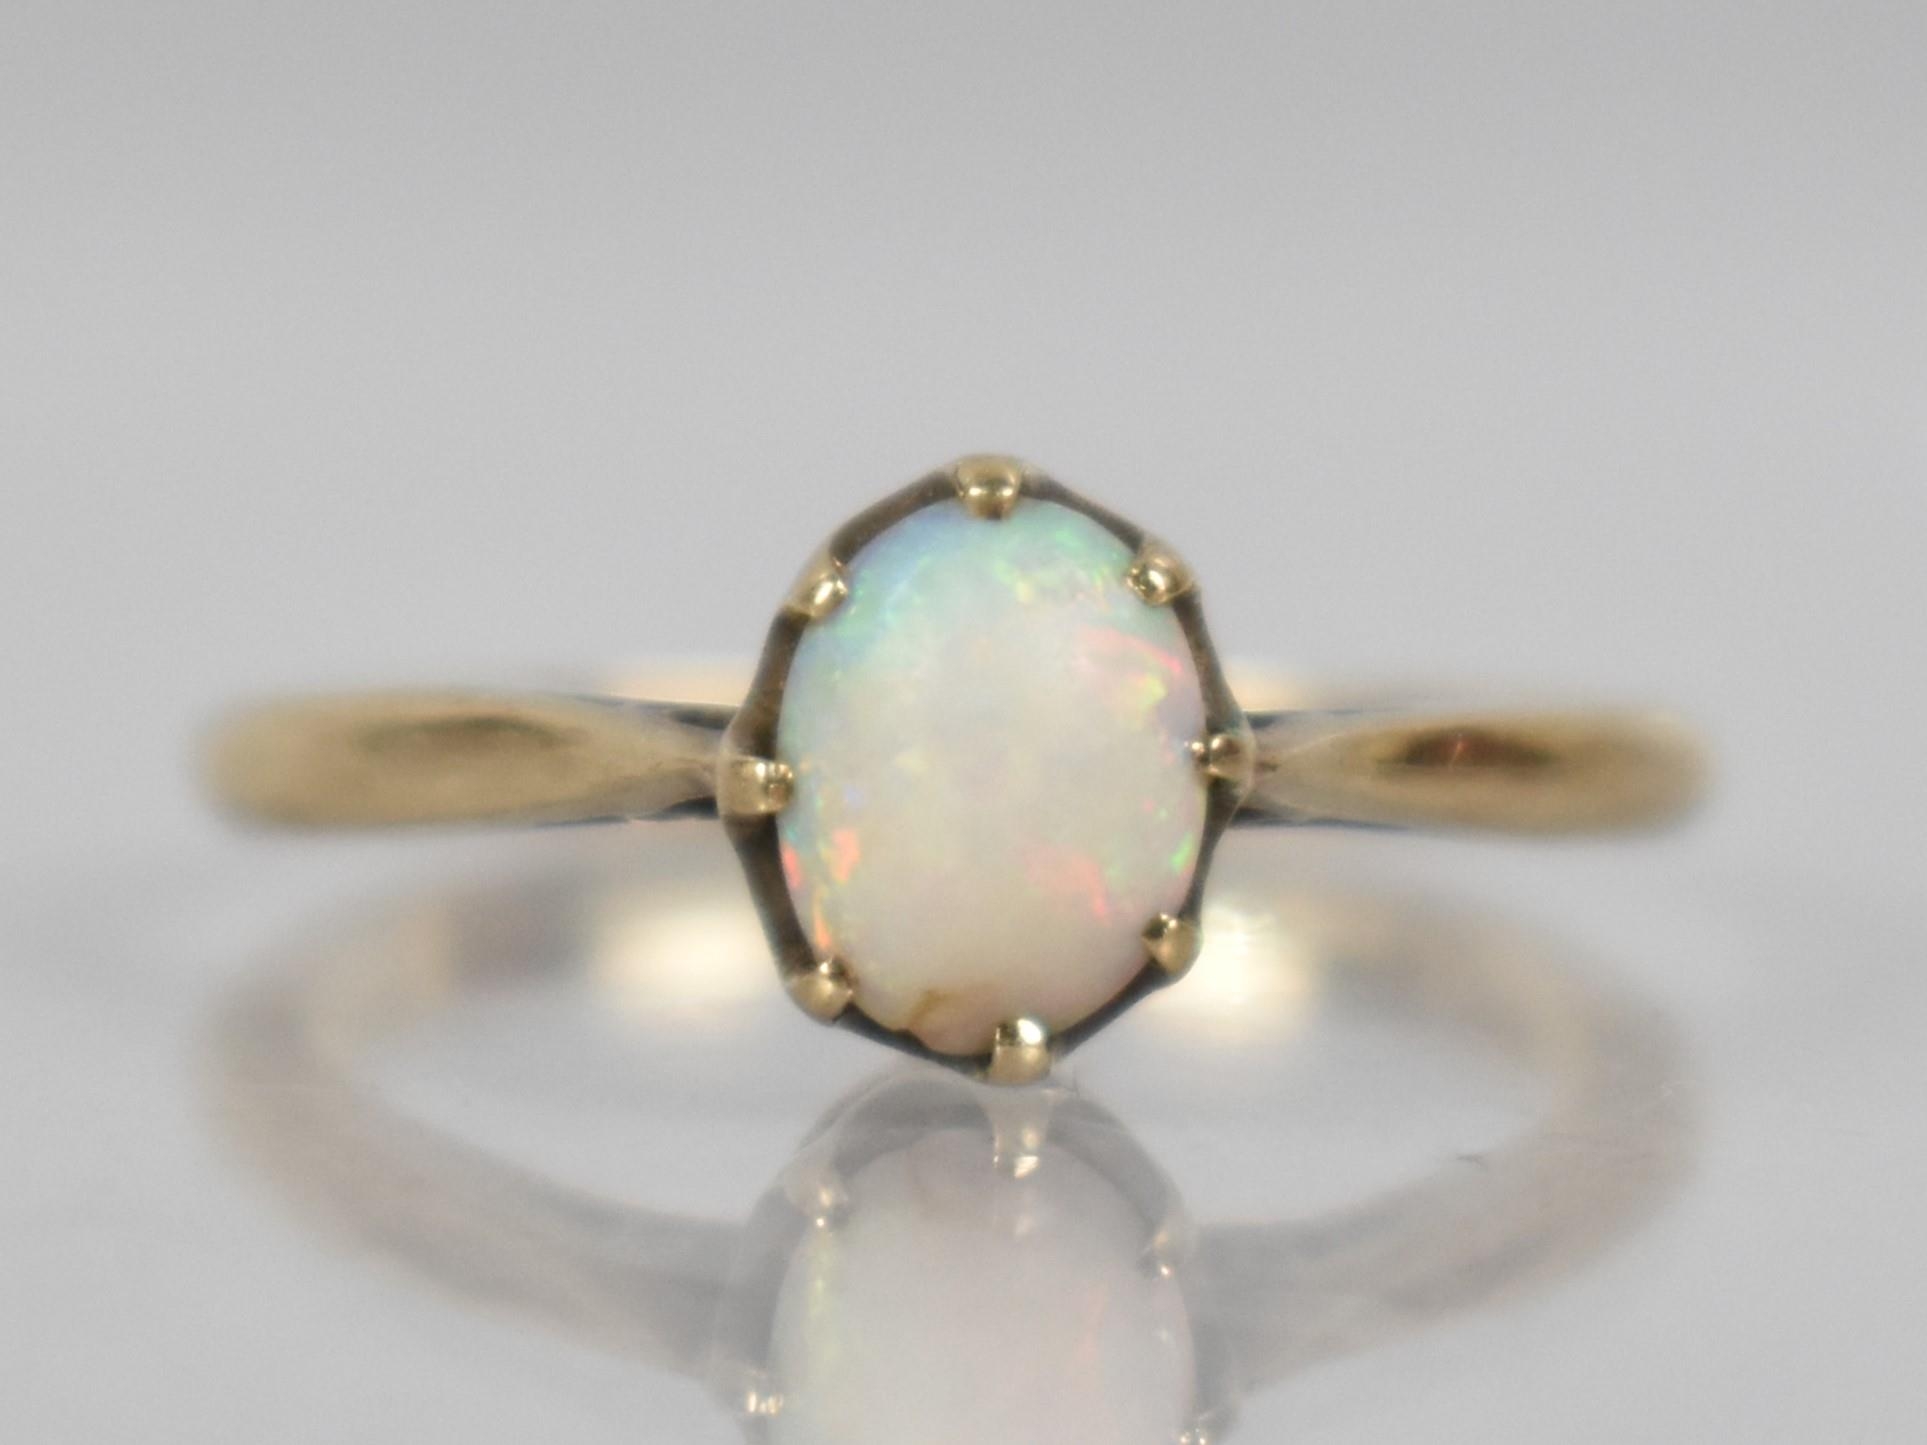 A 9ct Gold Opal Mounted Ring, Oval Cabochon Stone 7.2mm by 5.5mm, Raised in Eight Claws to Reverse - Image 3 of 4